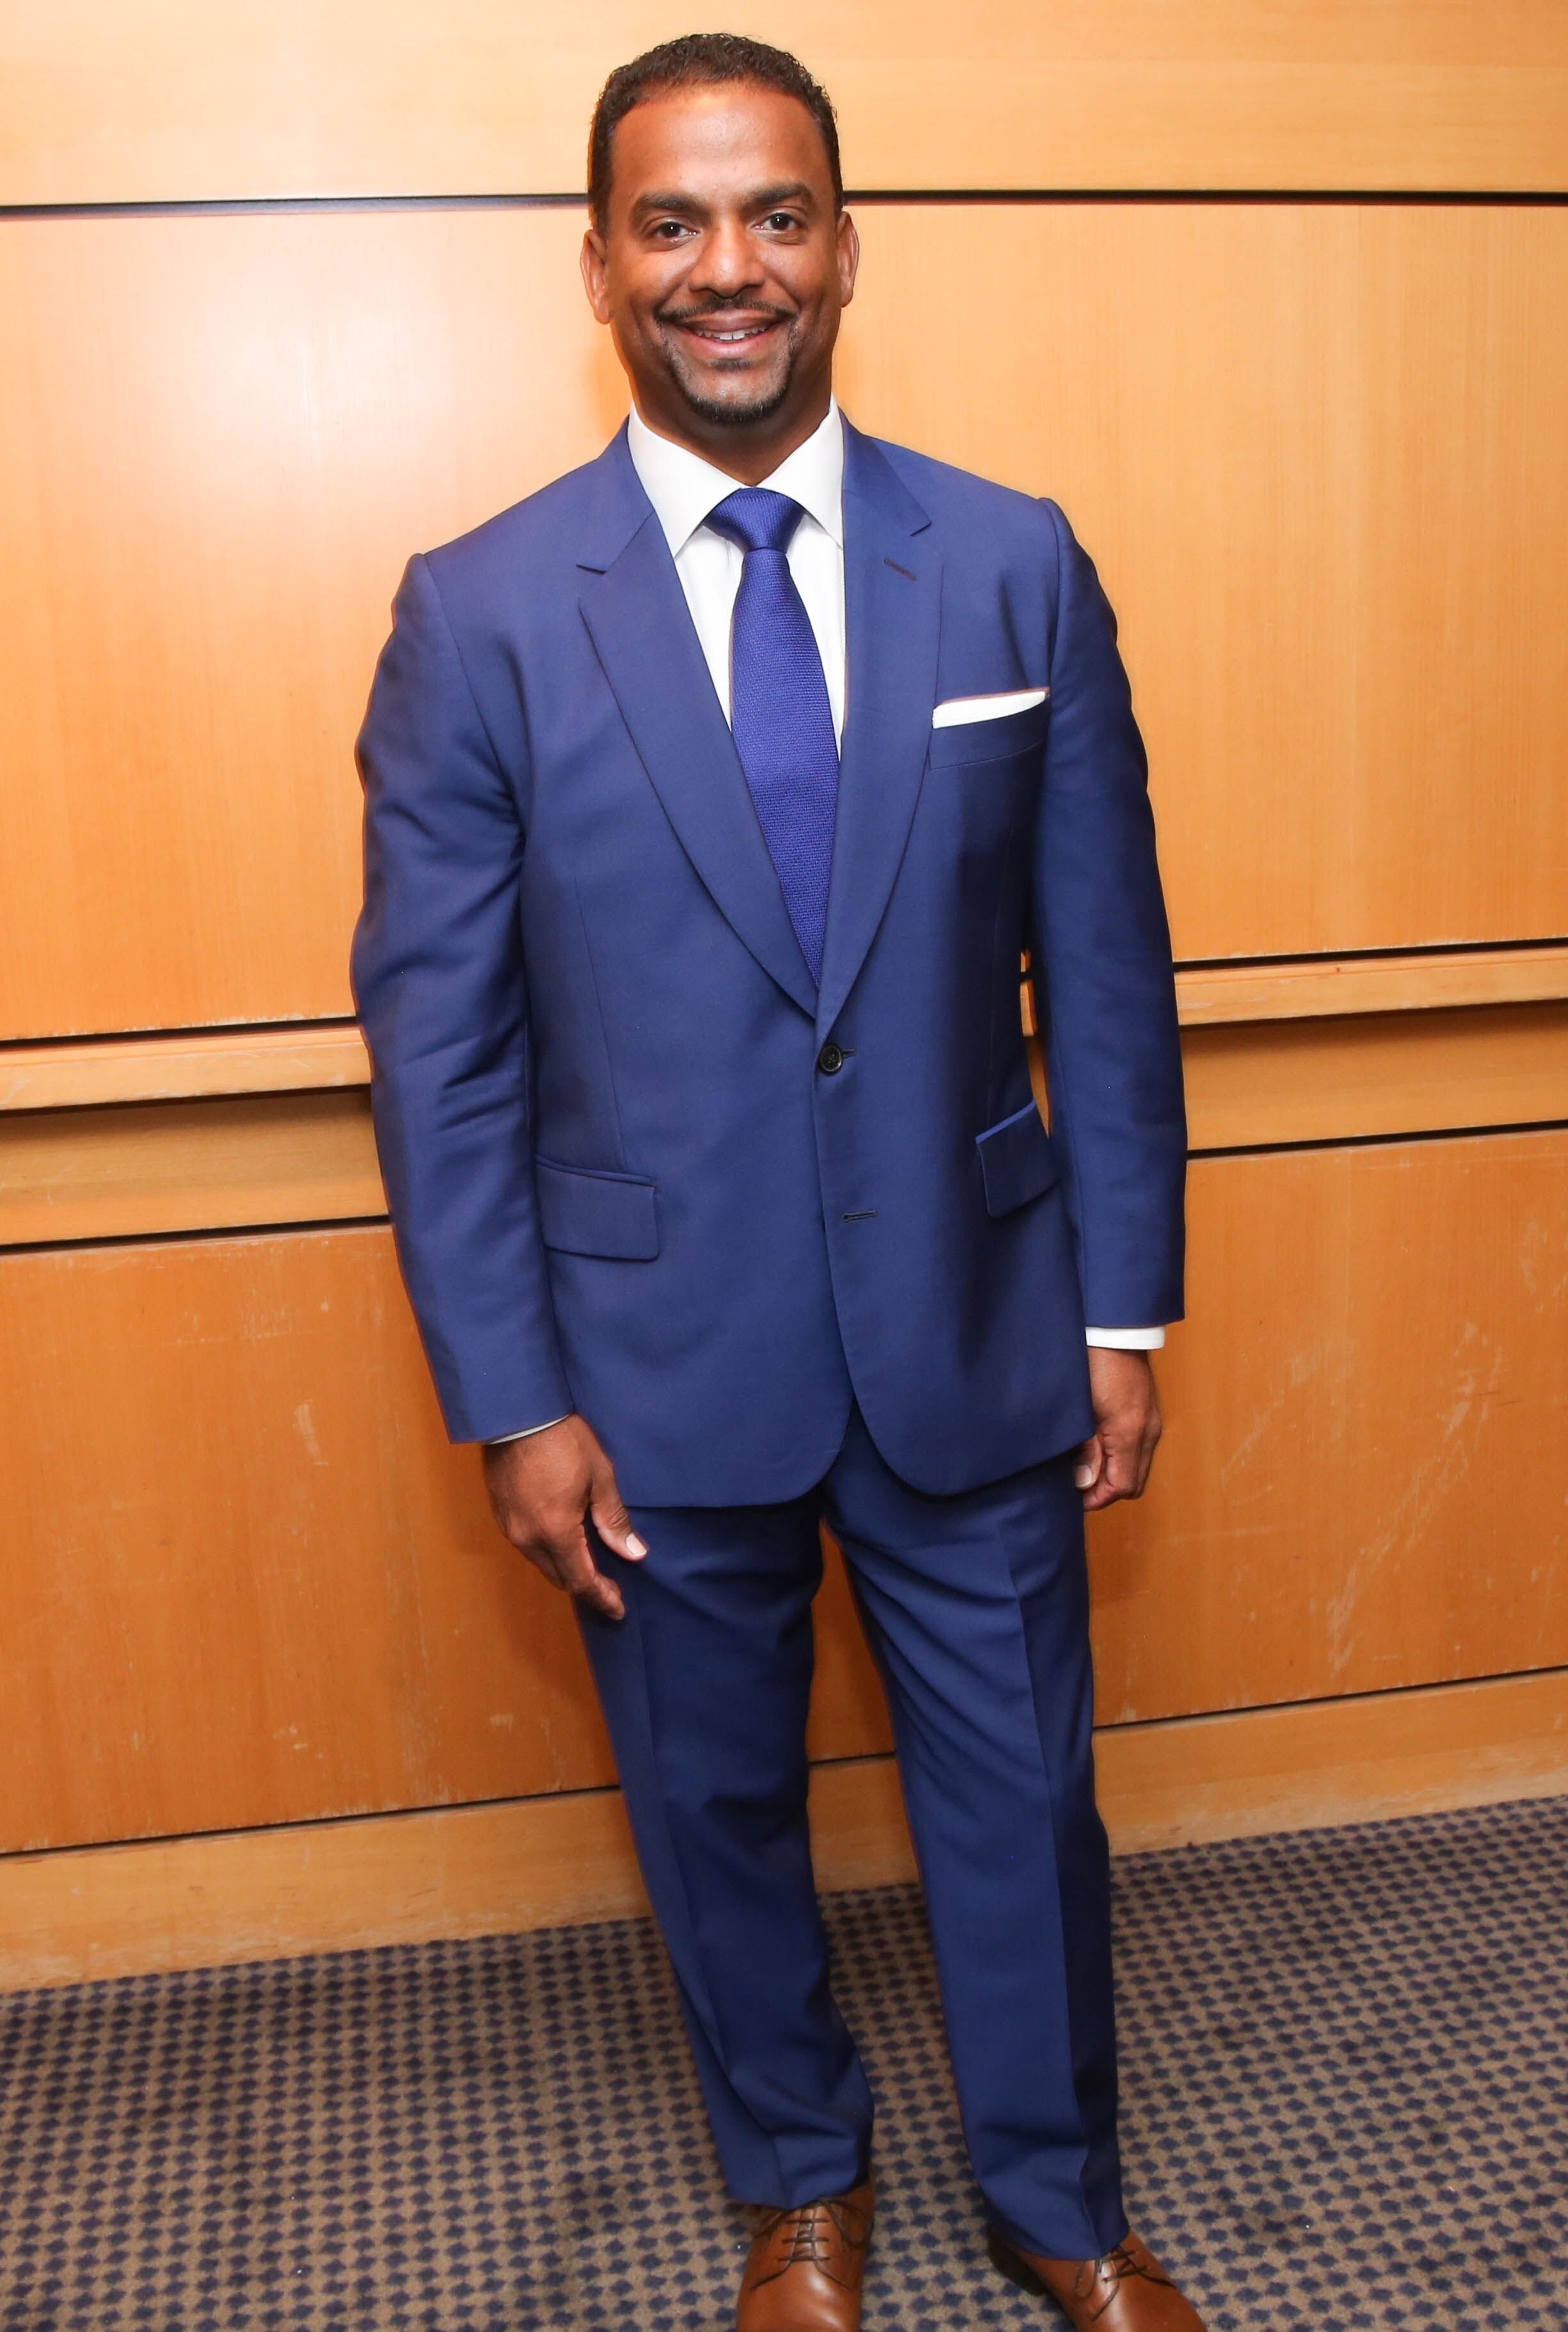 Alfonso Ribeiro attends The 35th Annual Caucus Awards Dinner at Skirball Cultural Center on December 3, 2017. | Photo: Getty Images